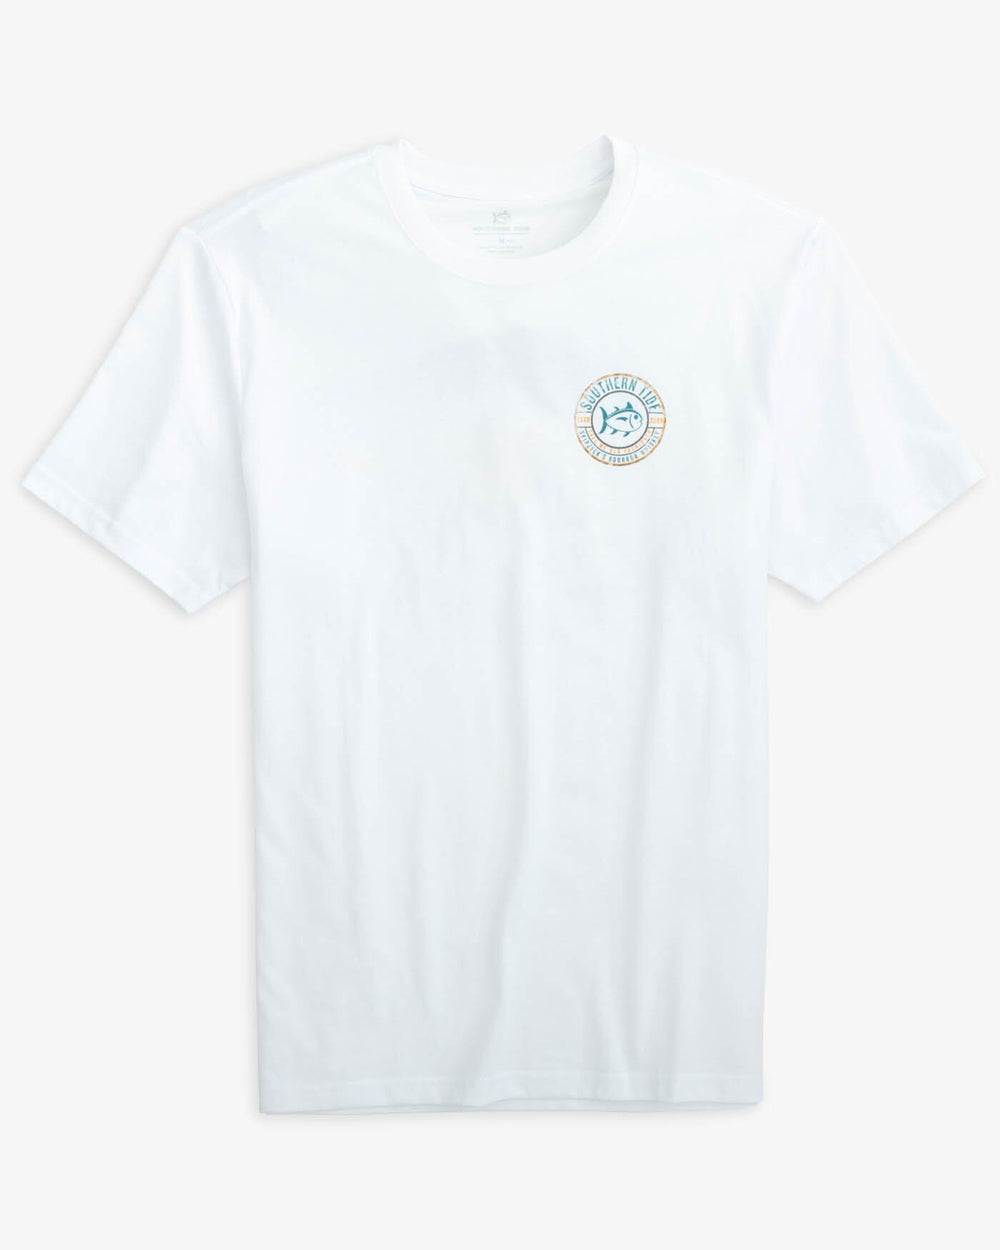 The front view of the Southern Tide Call Me Old Fashioned T-Shirt by Southern Tide - Classic White